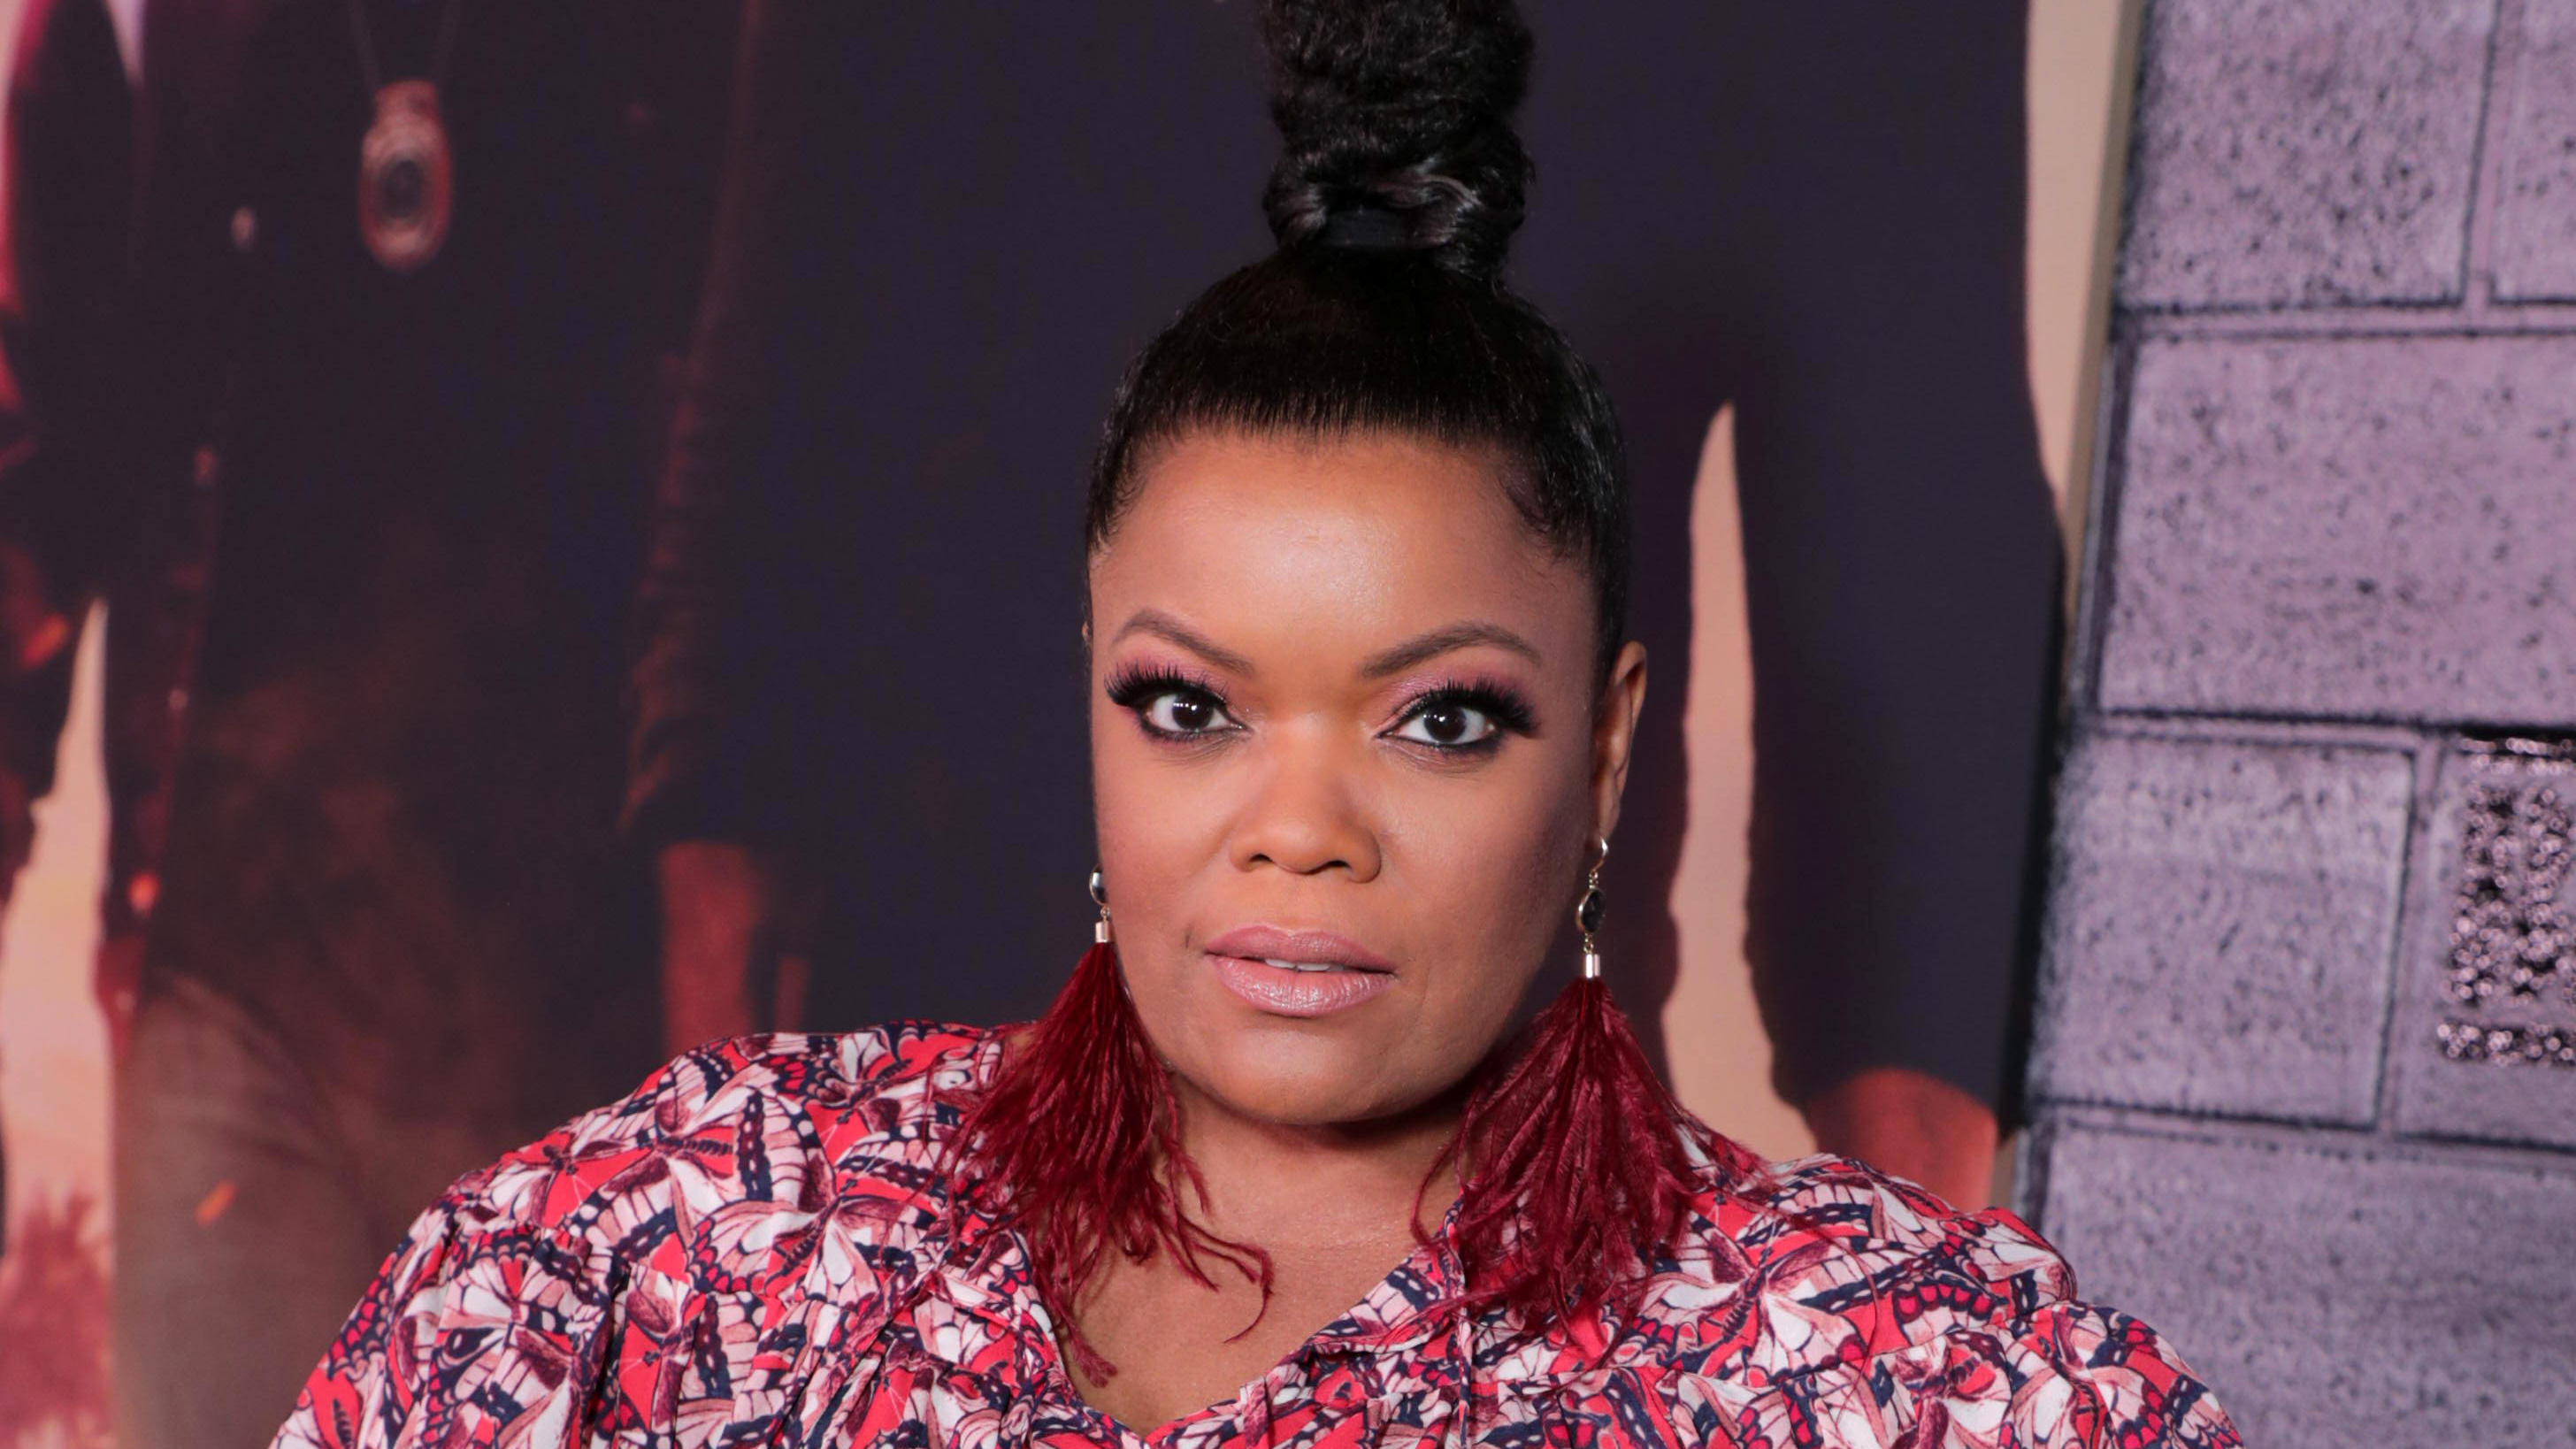 Yvette Nicole Brown attends the Los Angeles Premiere of Columbia Pictures BAD BOYS FOR LIFE. Los Angeles Premiere of Columbia Pictures BAD BOYS FOR LIFE, Arrivals, TCL Chinese Theatre, Los Angeles, CA, USA - 14 Jan 2020